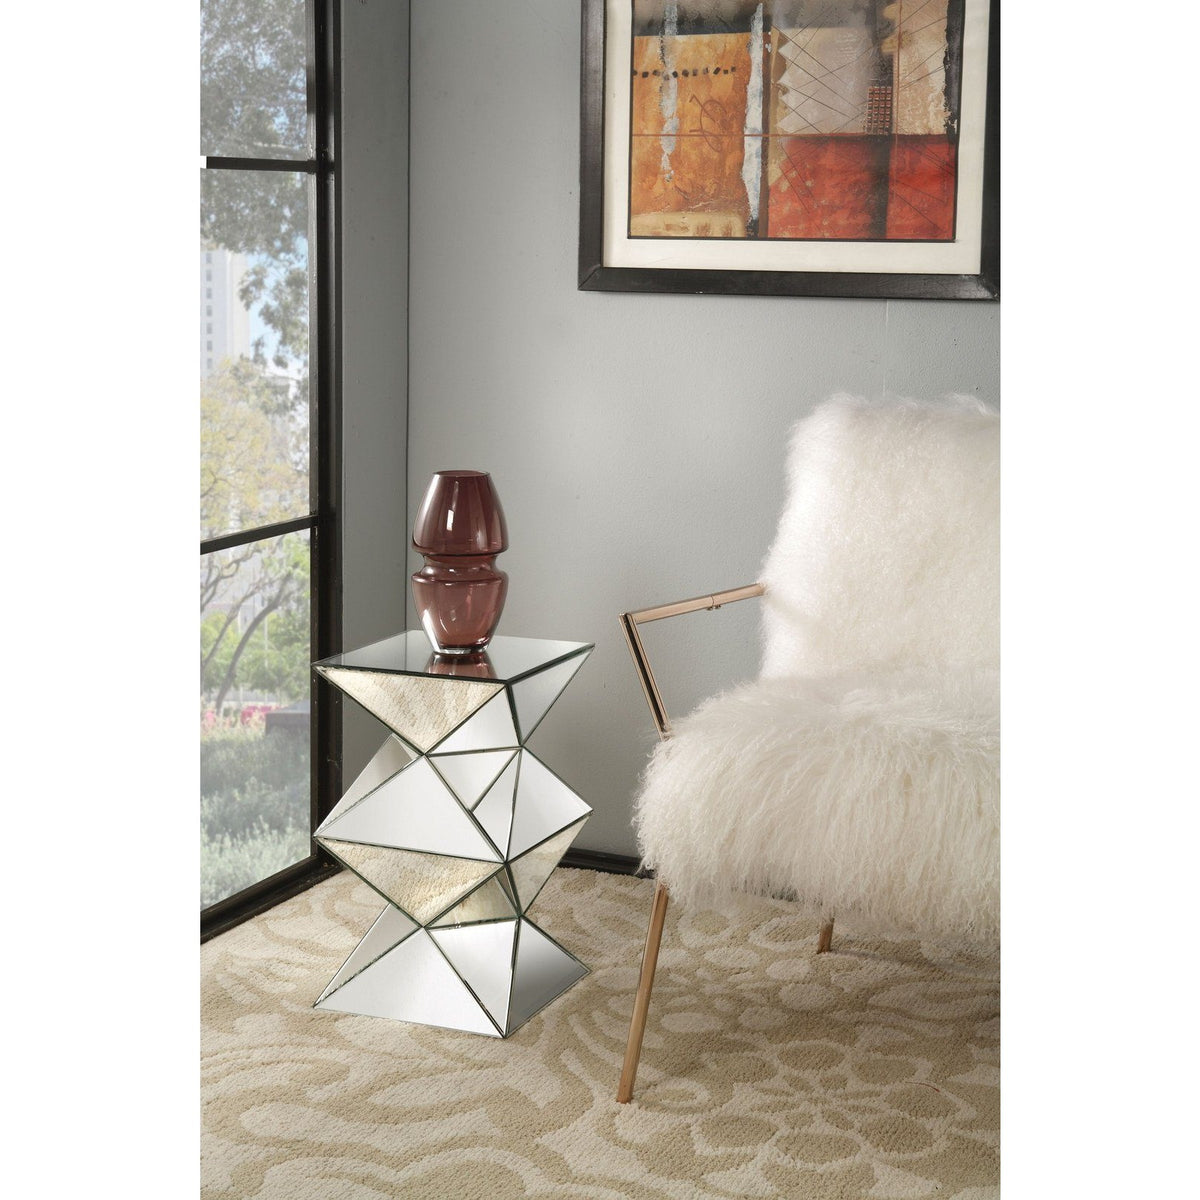 Hollywood Regency Mirrored Pedestal Side Table,mirrored table,Adley & Company Inc.